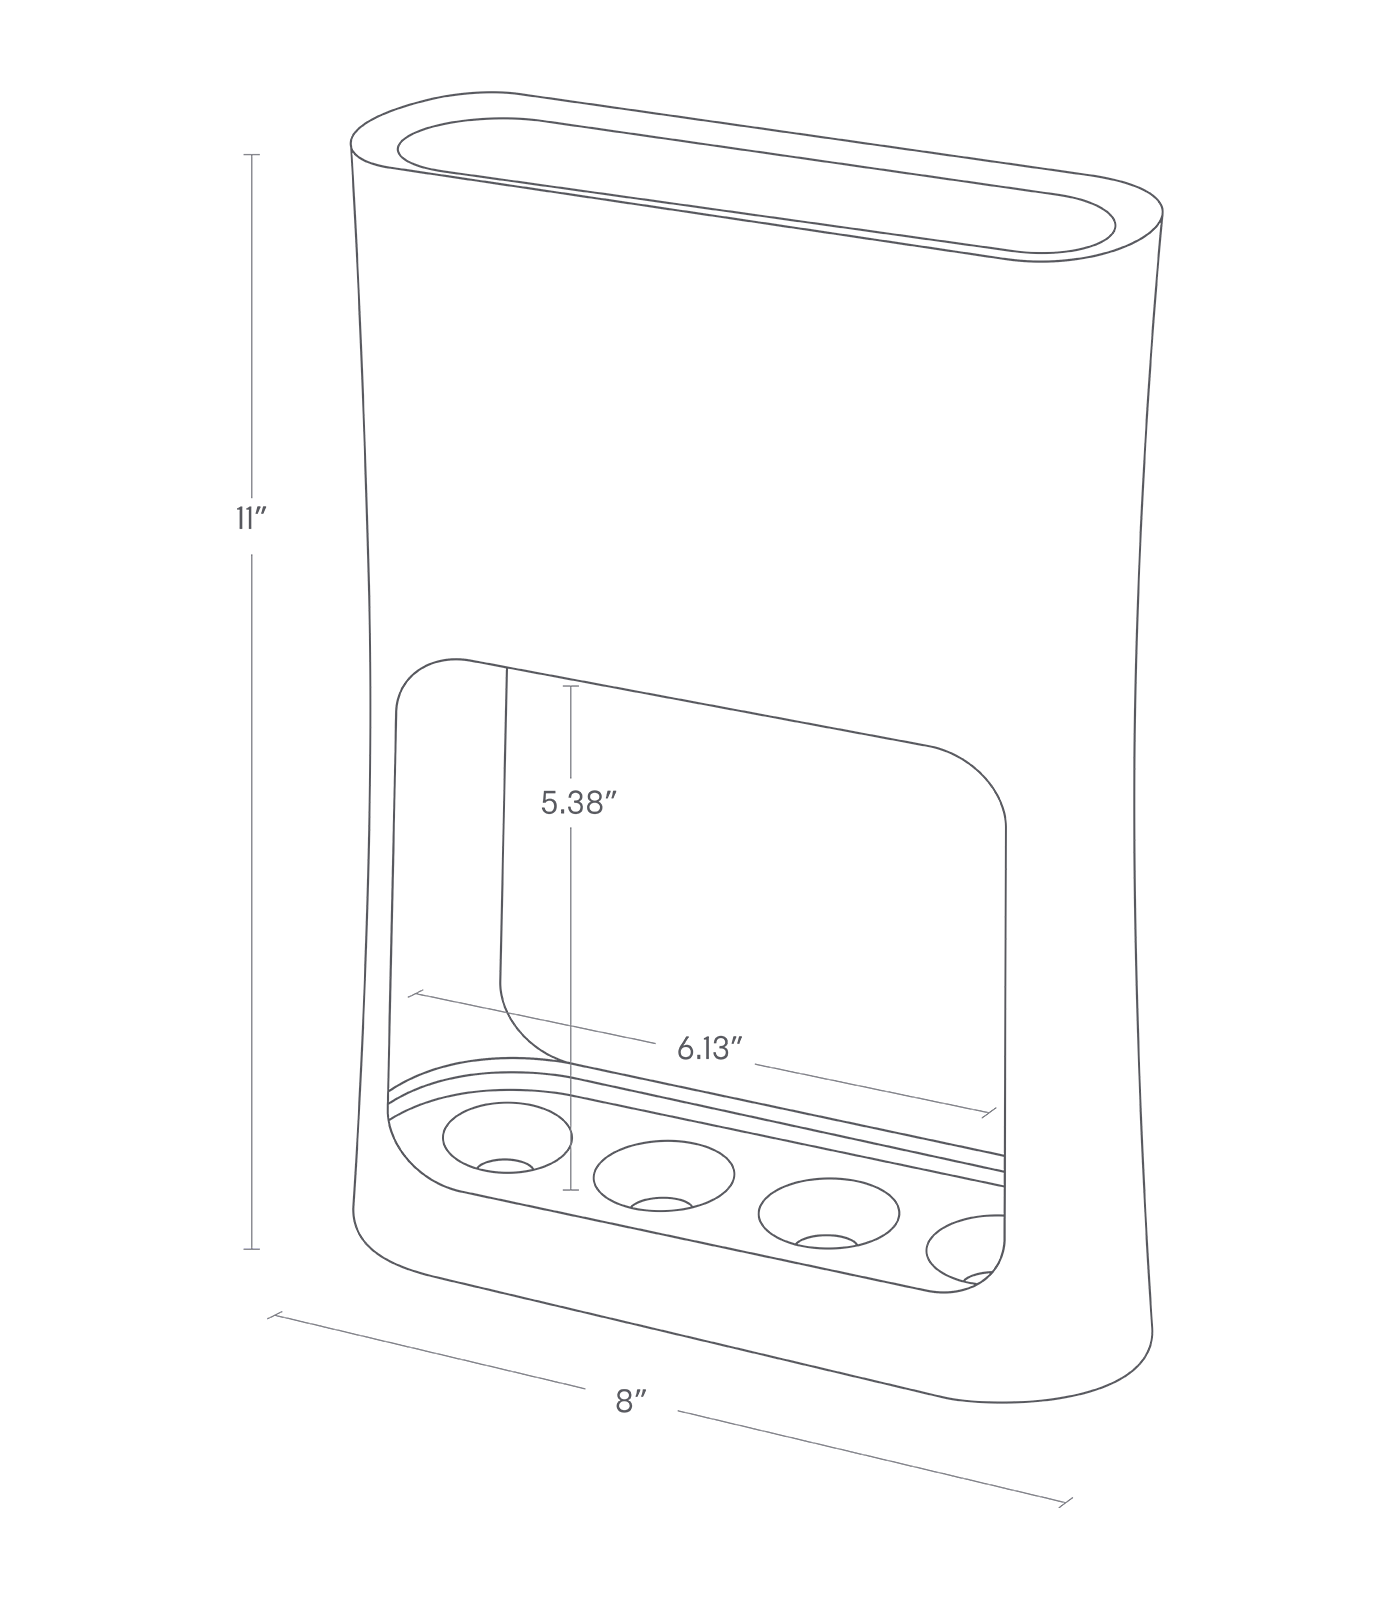 Dimension image for Compact Umbrella Stand showing length of 8